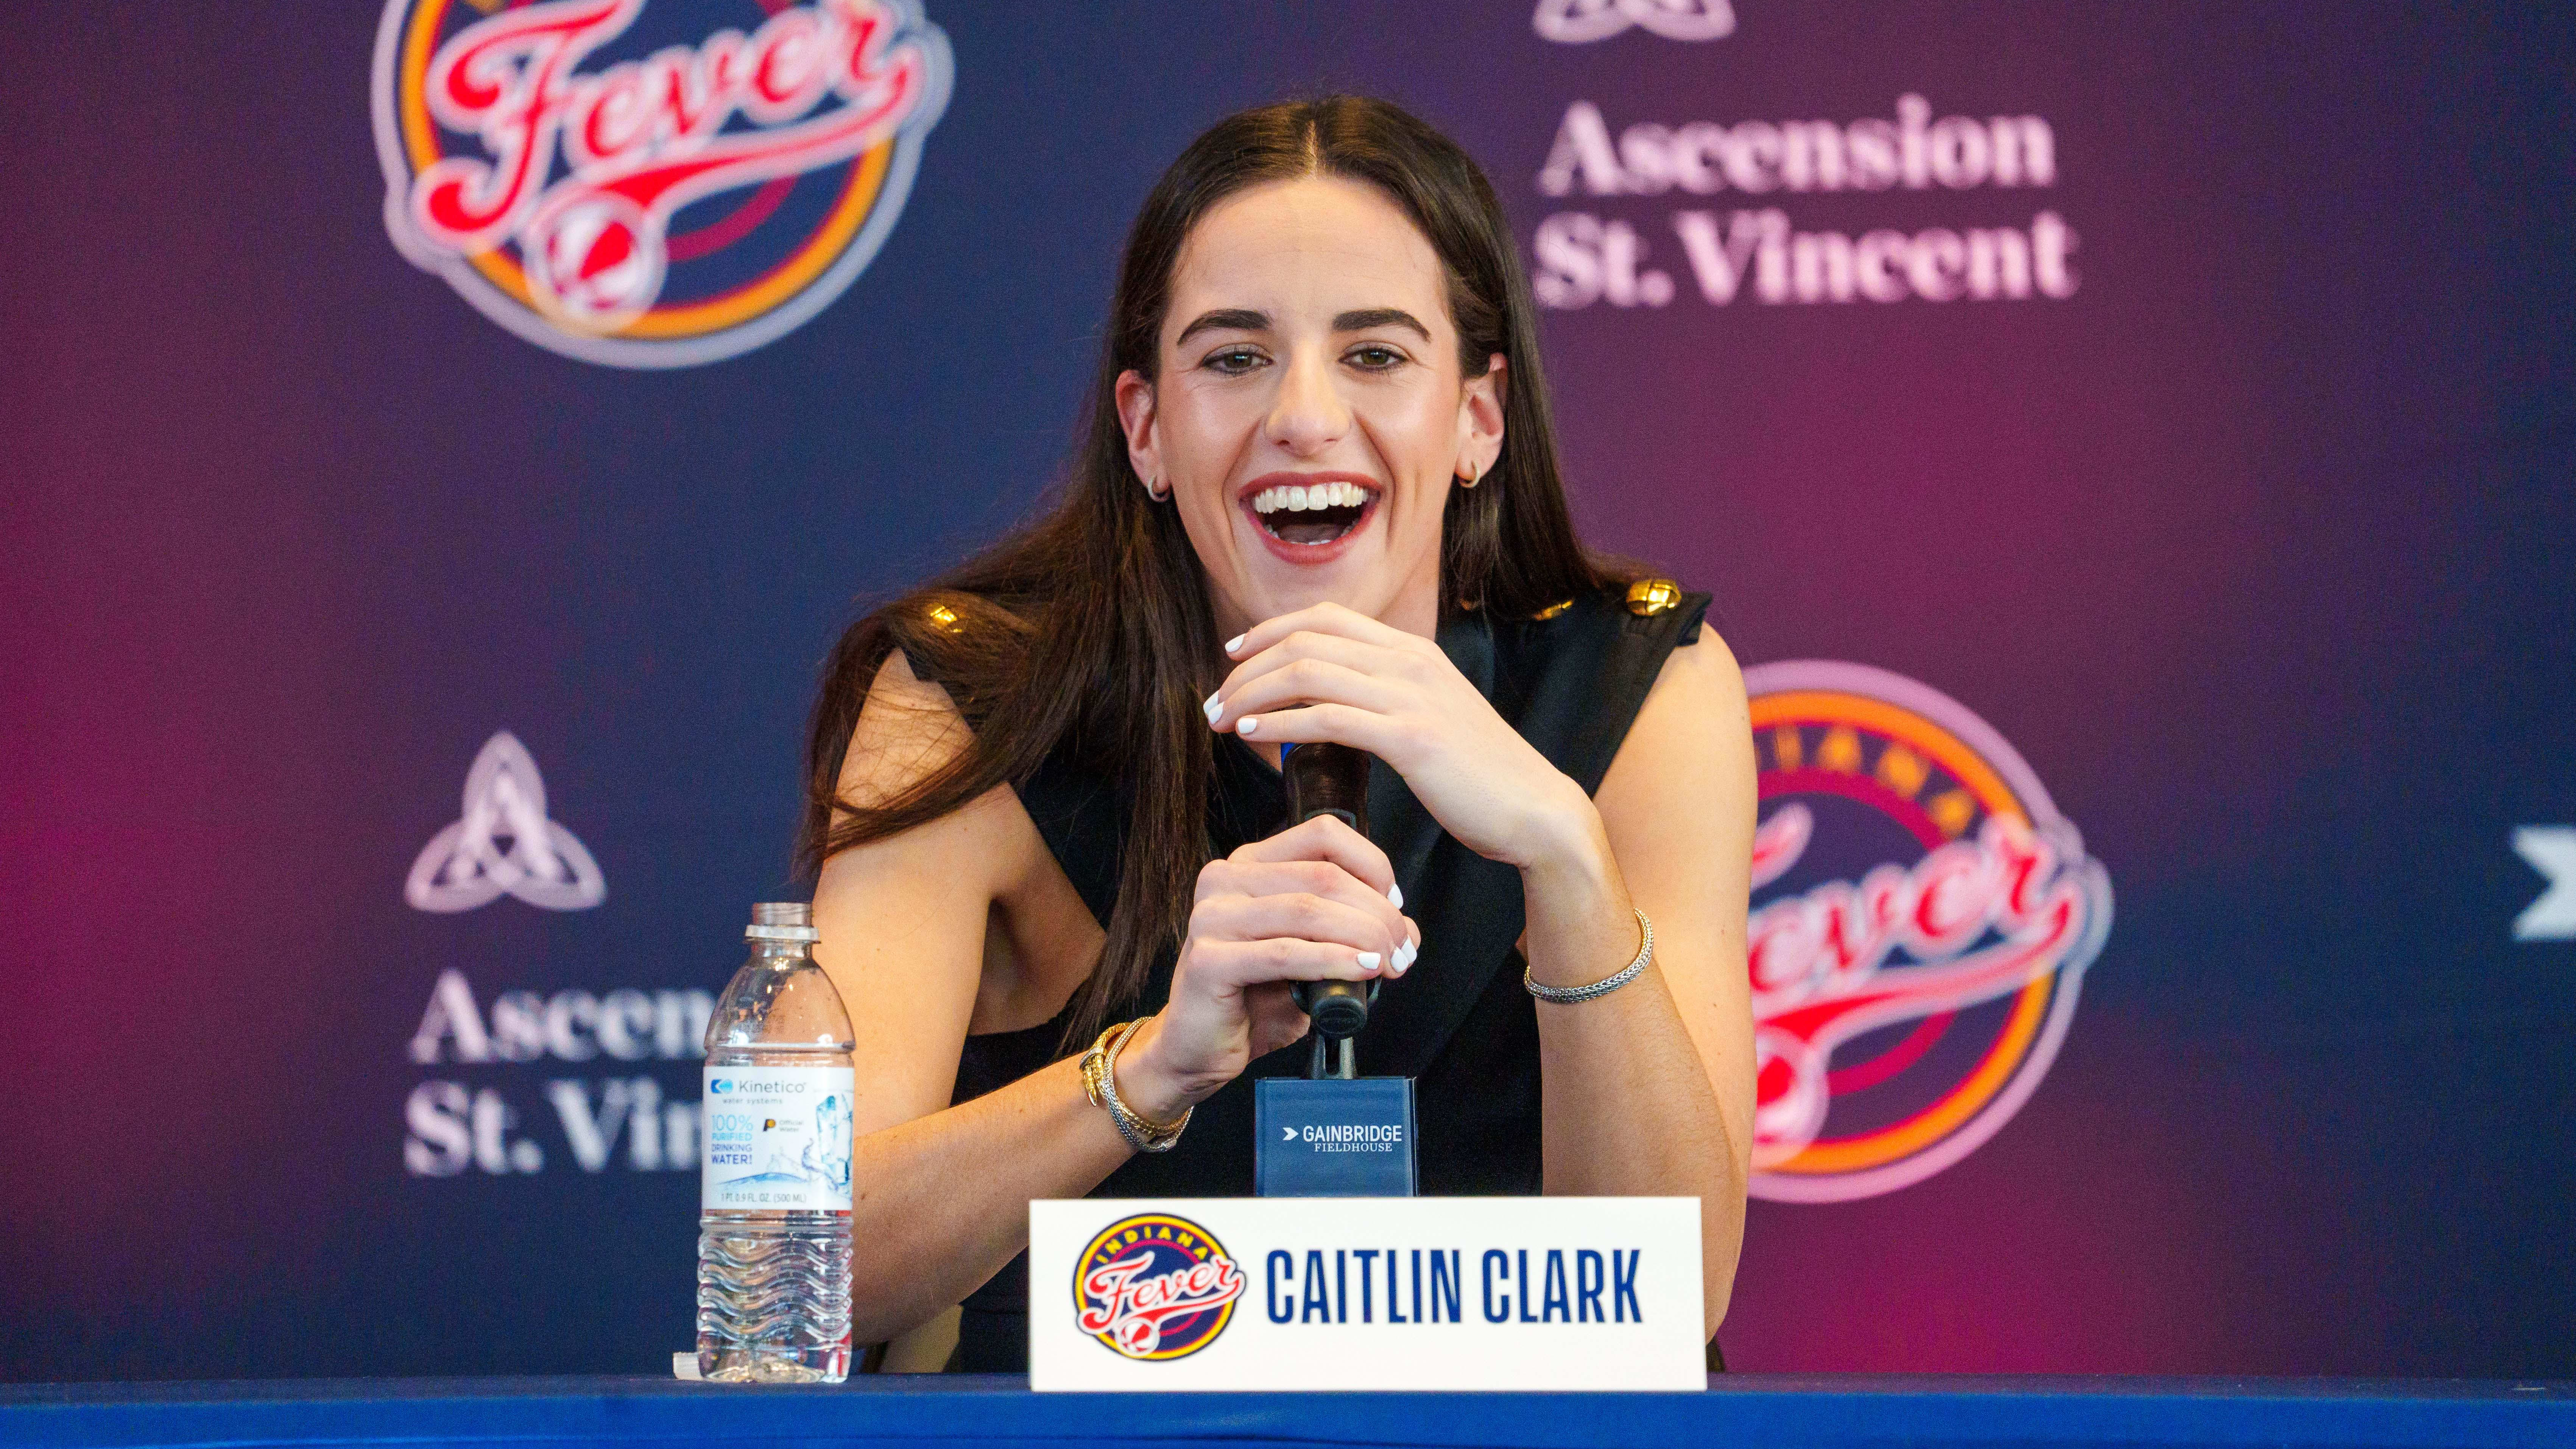 See How Much Money Each Sneaker Brand Offered Caitlin Clark